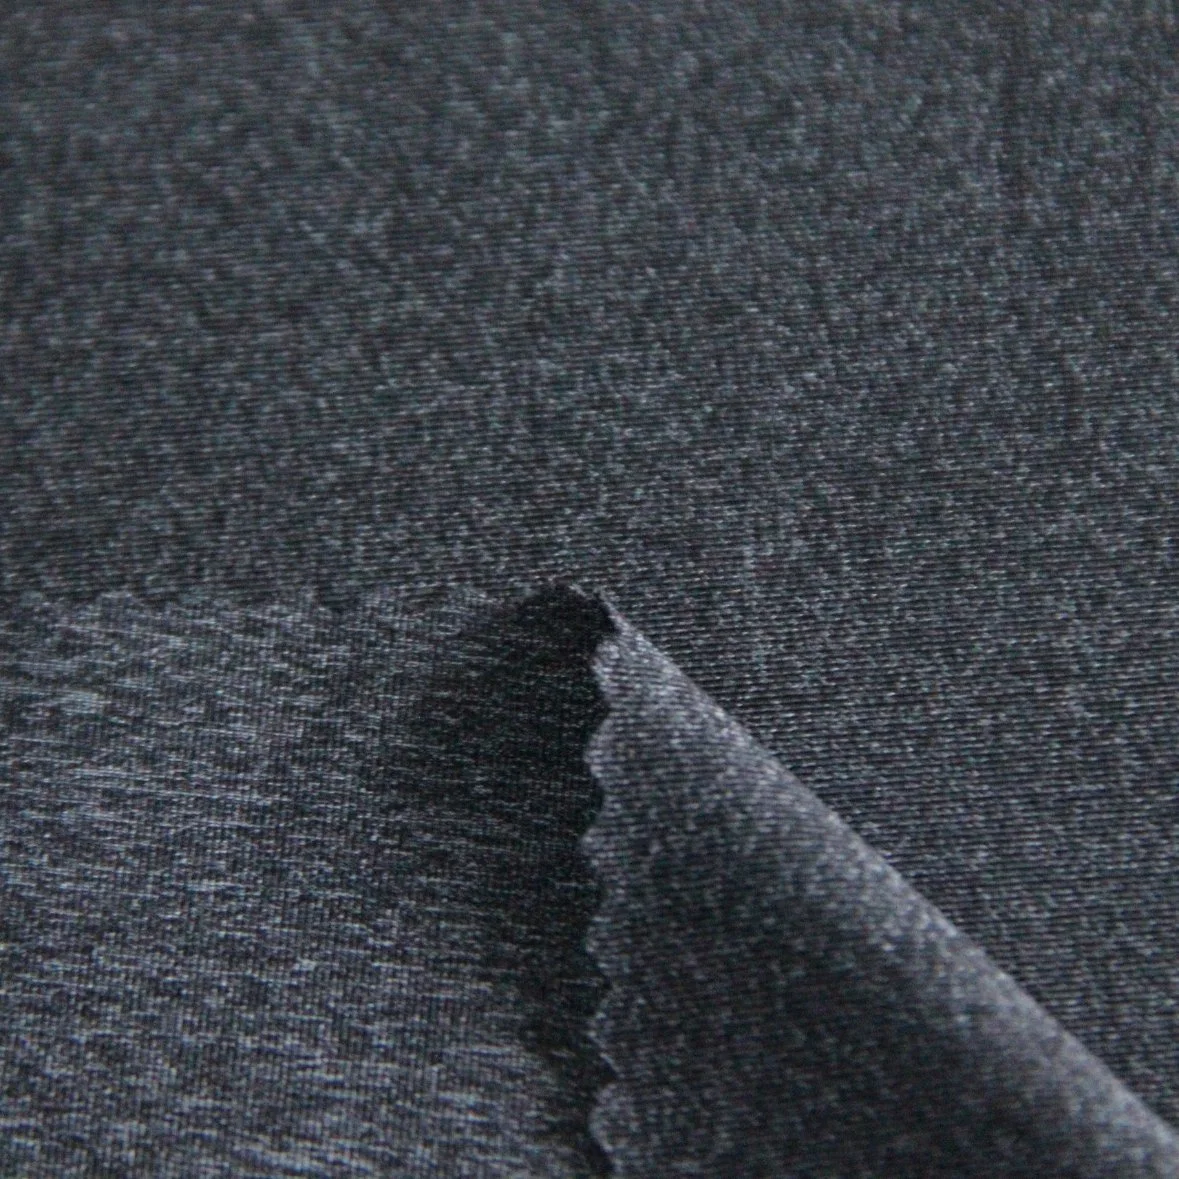 Nt Polyester/Nylon with Spandex Knitted Charcoal Htr Cotton Like Single Jersey Fabric for Top/Underwear/Sportswear